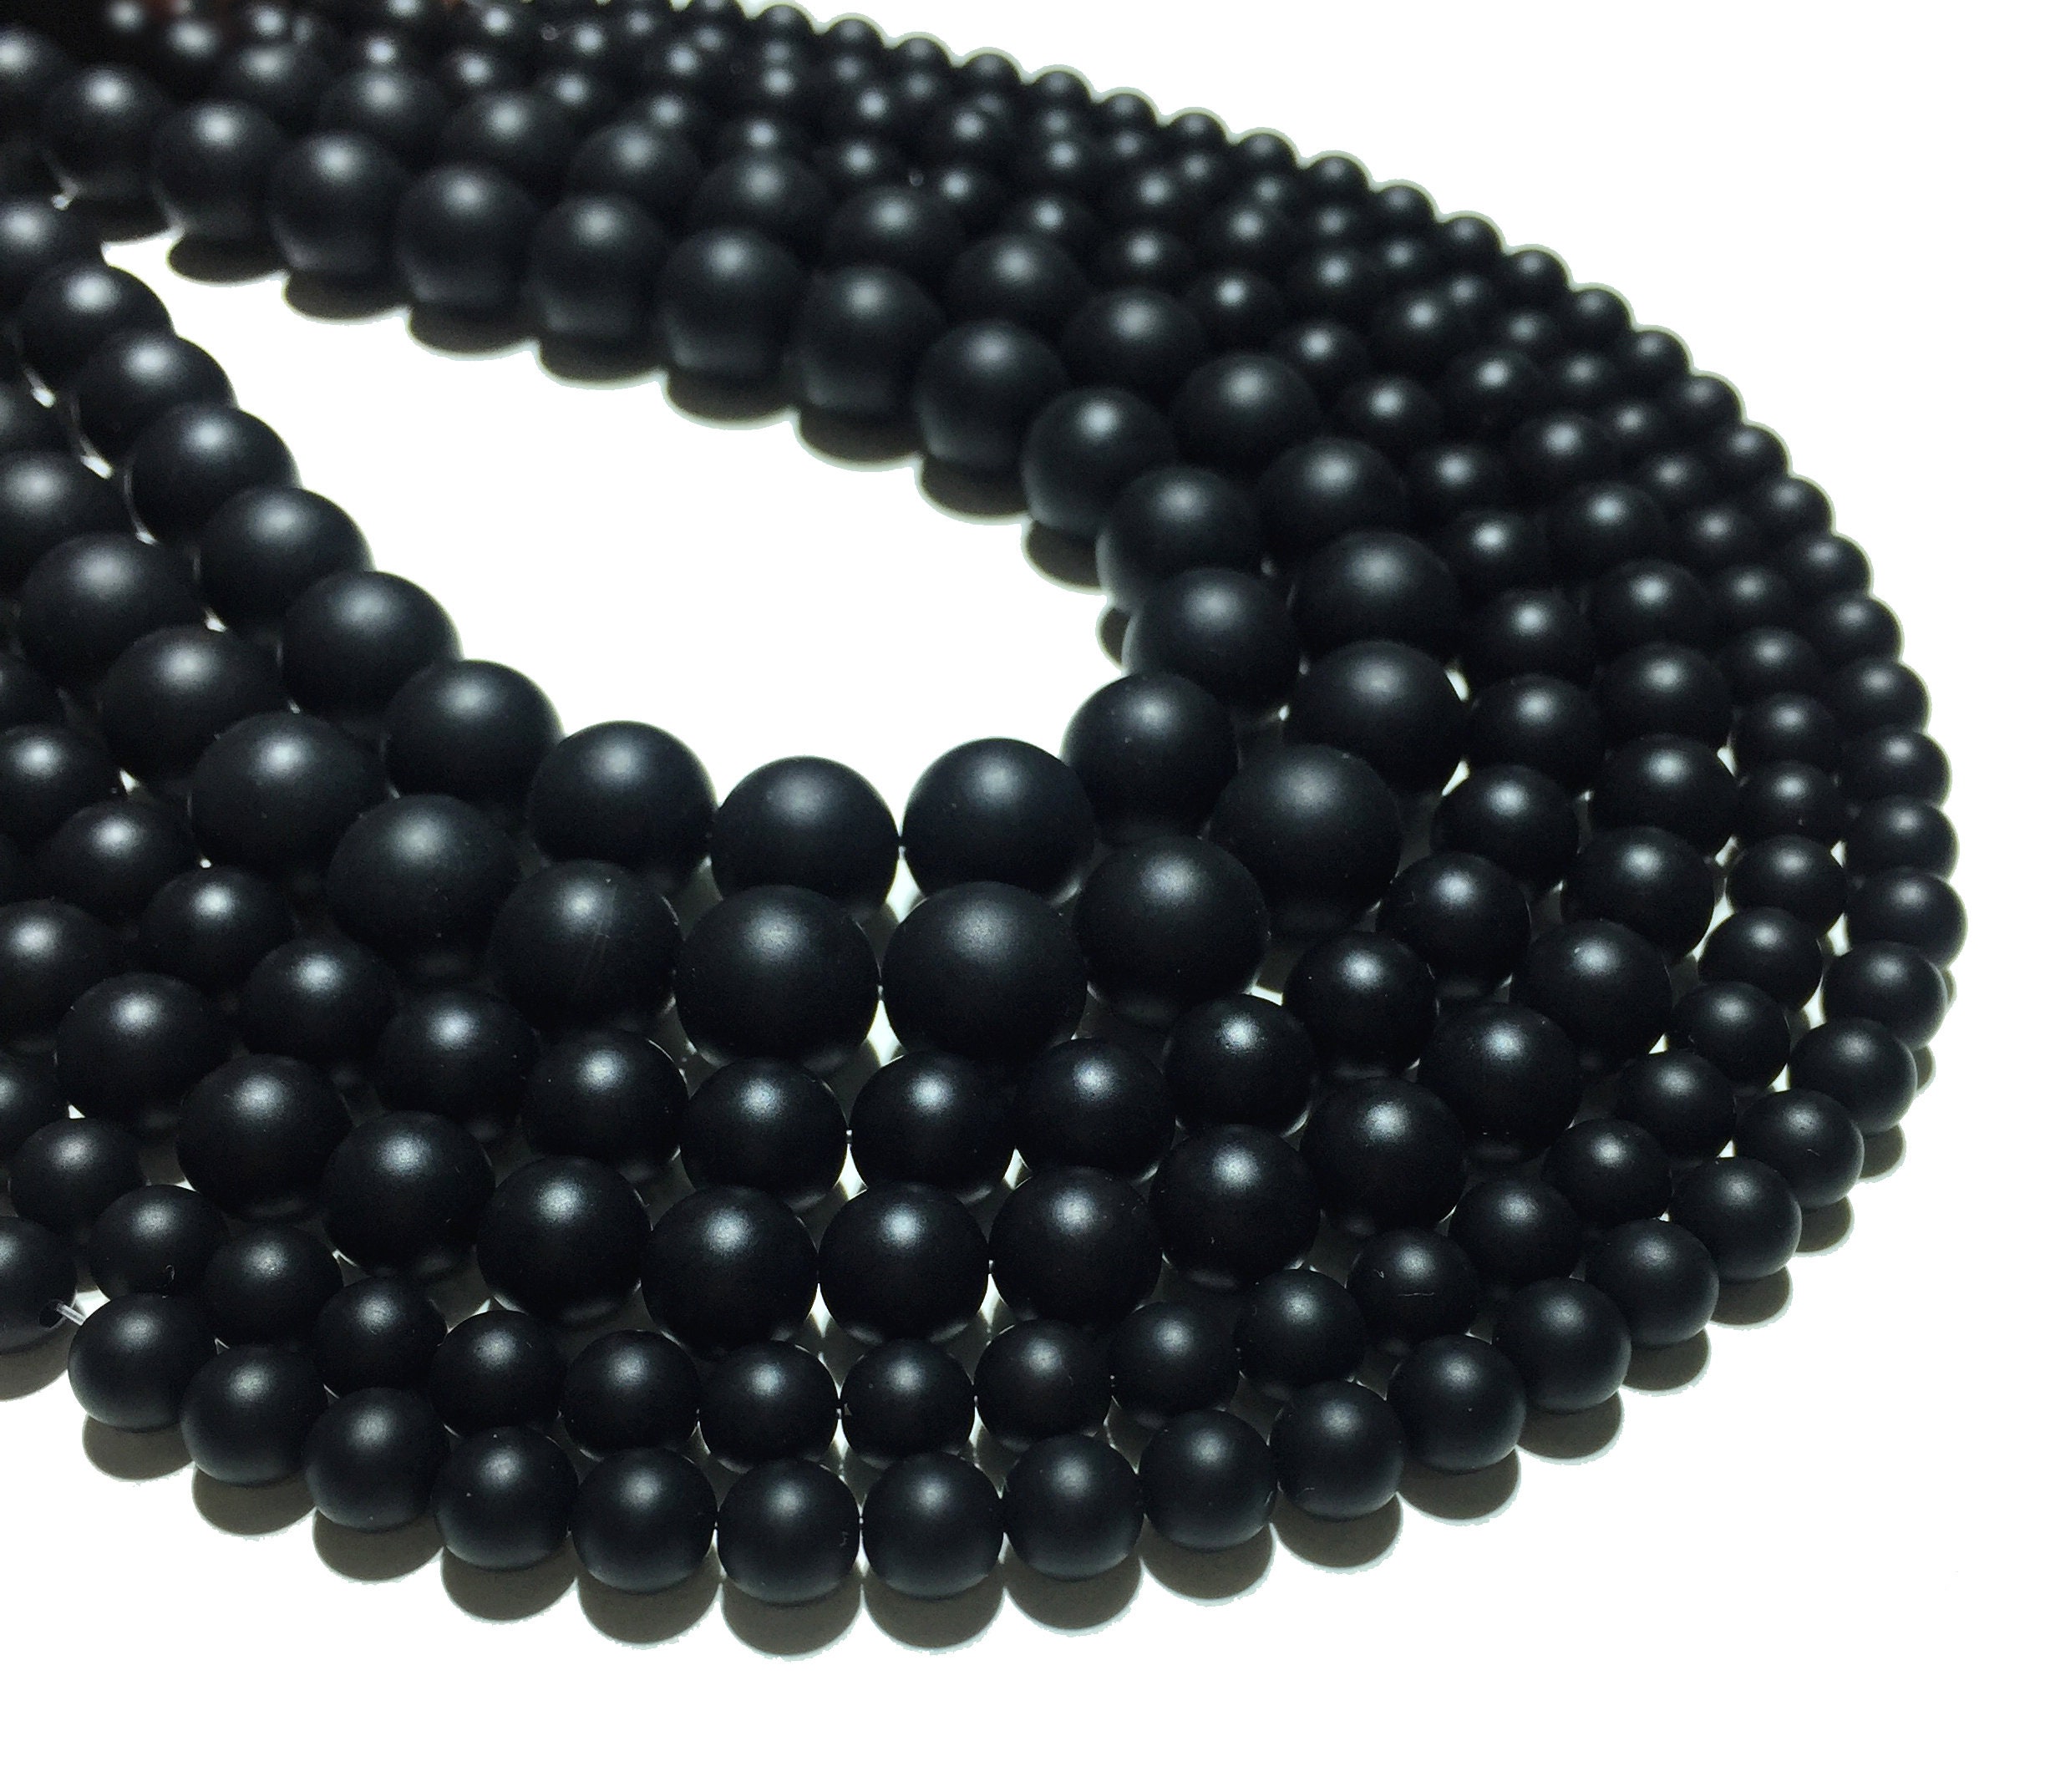 Natural Matte Black Onyx Gemstone Loose Beads,6mm 8mm 10mm Bracelet Spacer Beads,DIY Jewelry Accessory 1 Strand